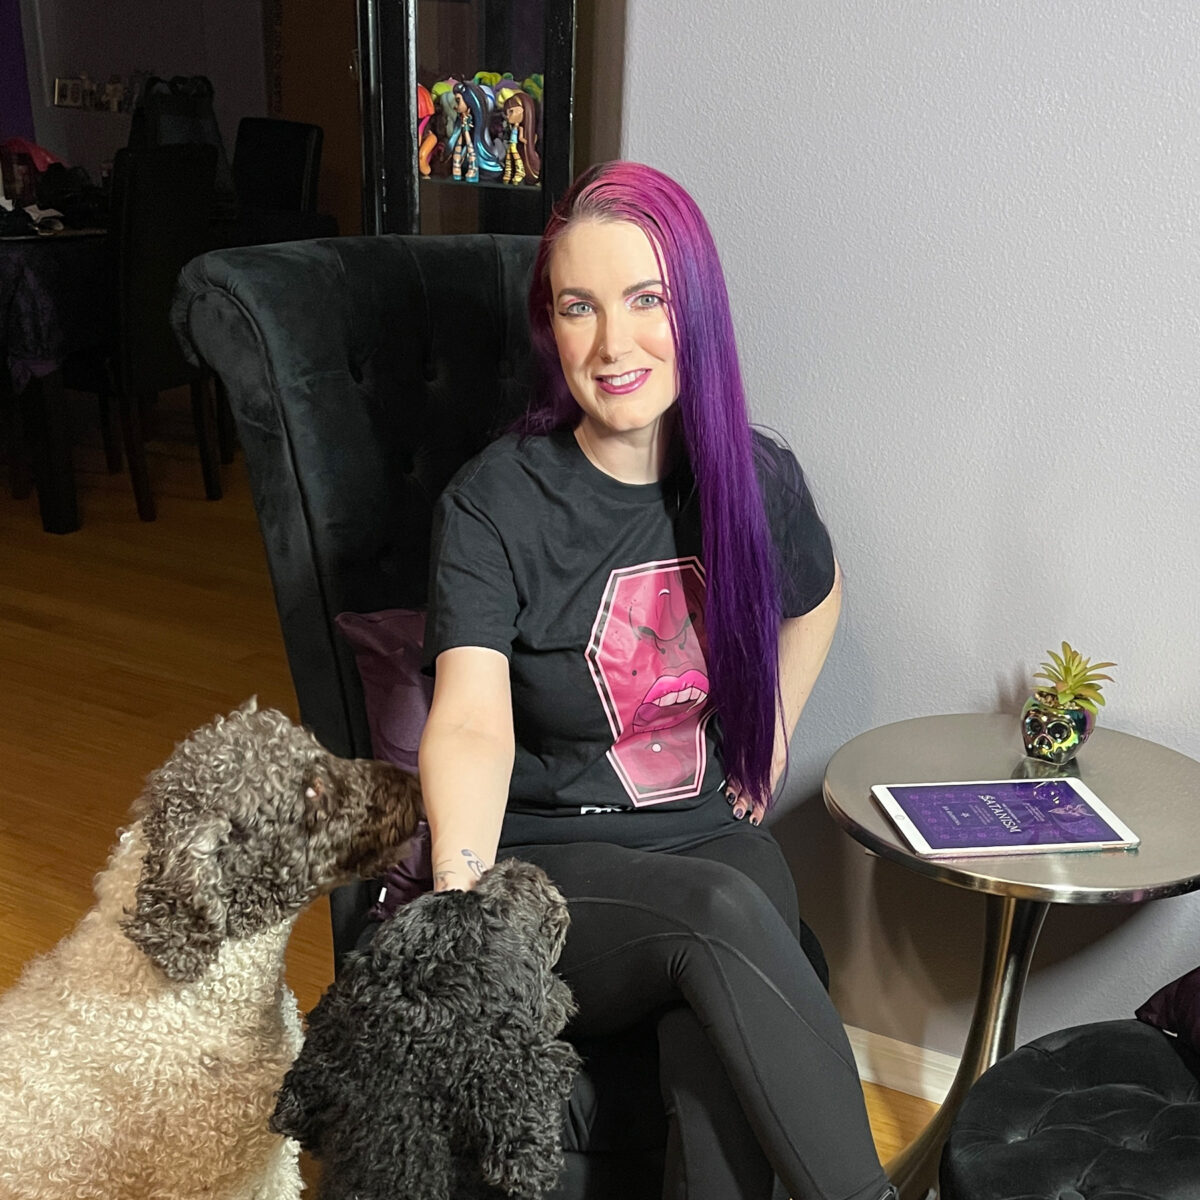 Amaya and Nyx, standard poodles, are standing next to seated Cordelia wearing a Bite Me shirt